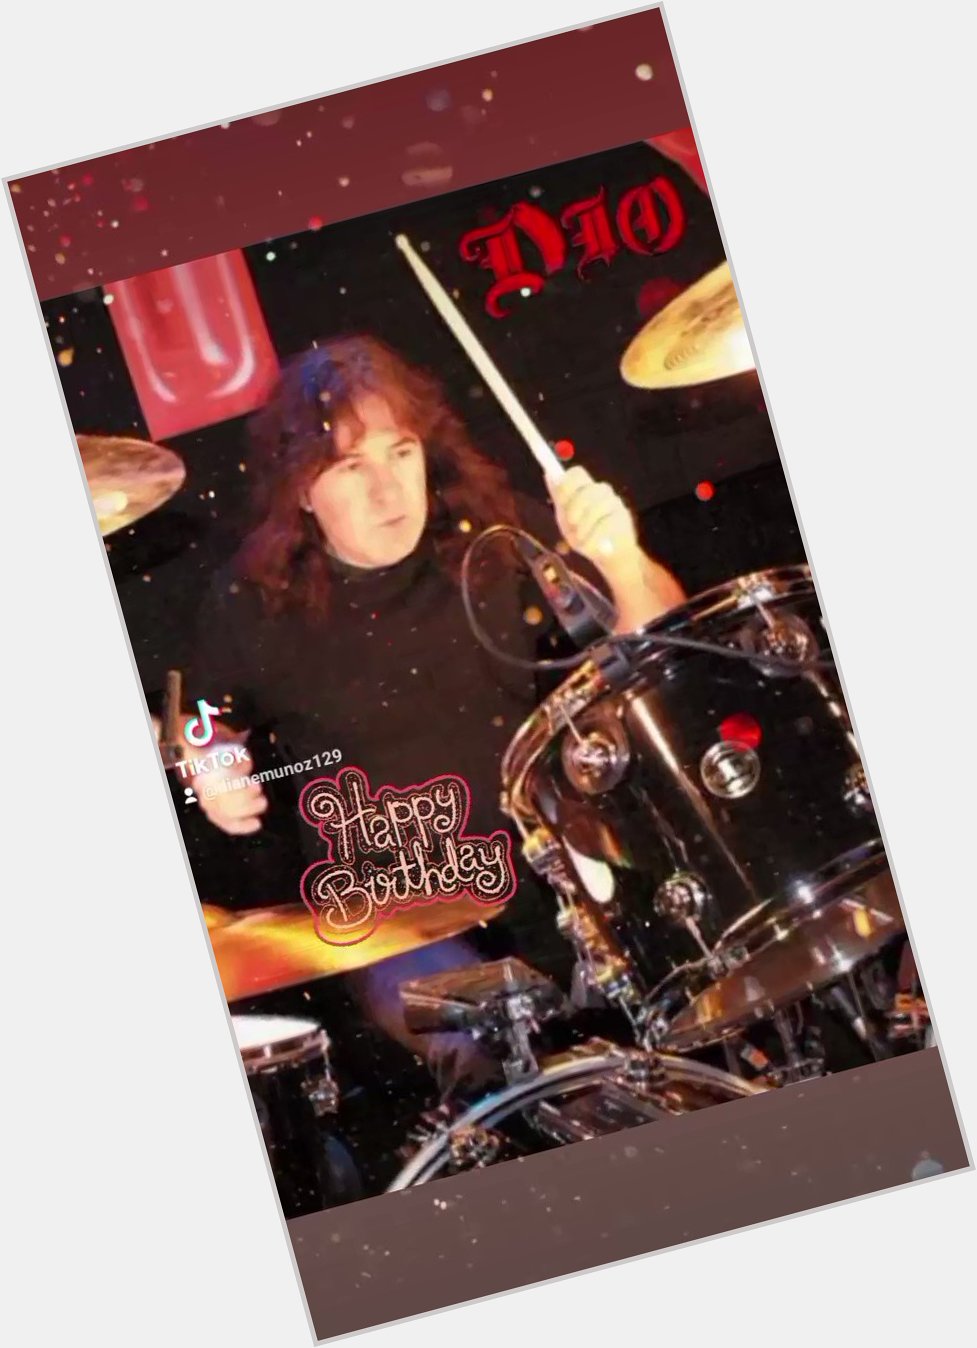 Happy 60th Birthday To The Legendary Simon Wright (AC/DC 83-89 & Dio 89-91, Drummer) June 19th, 1963 